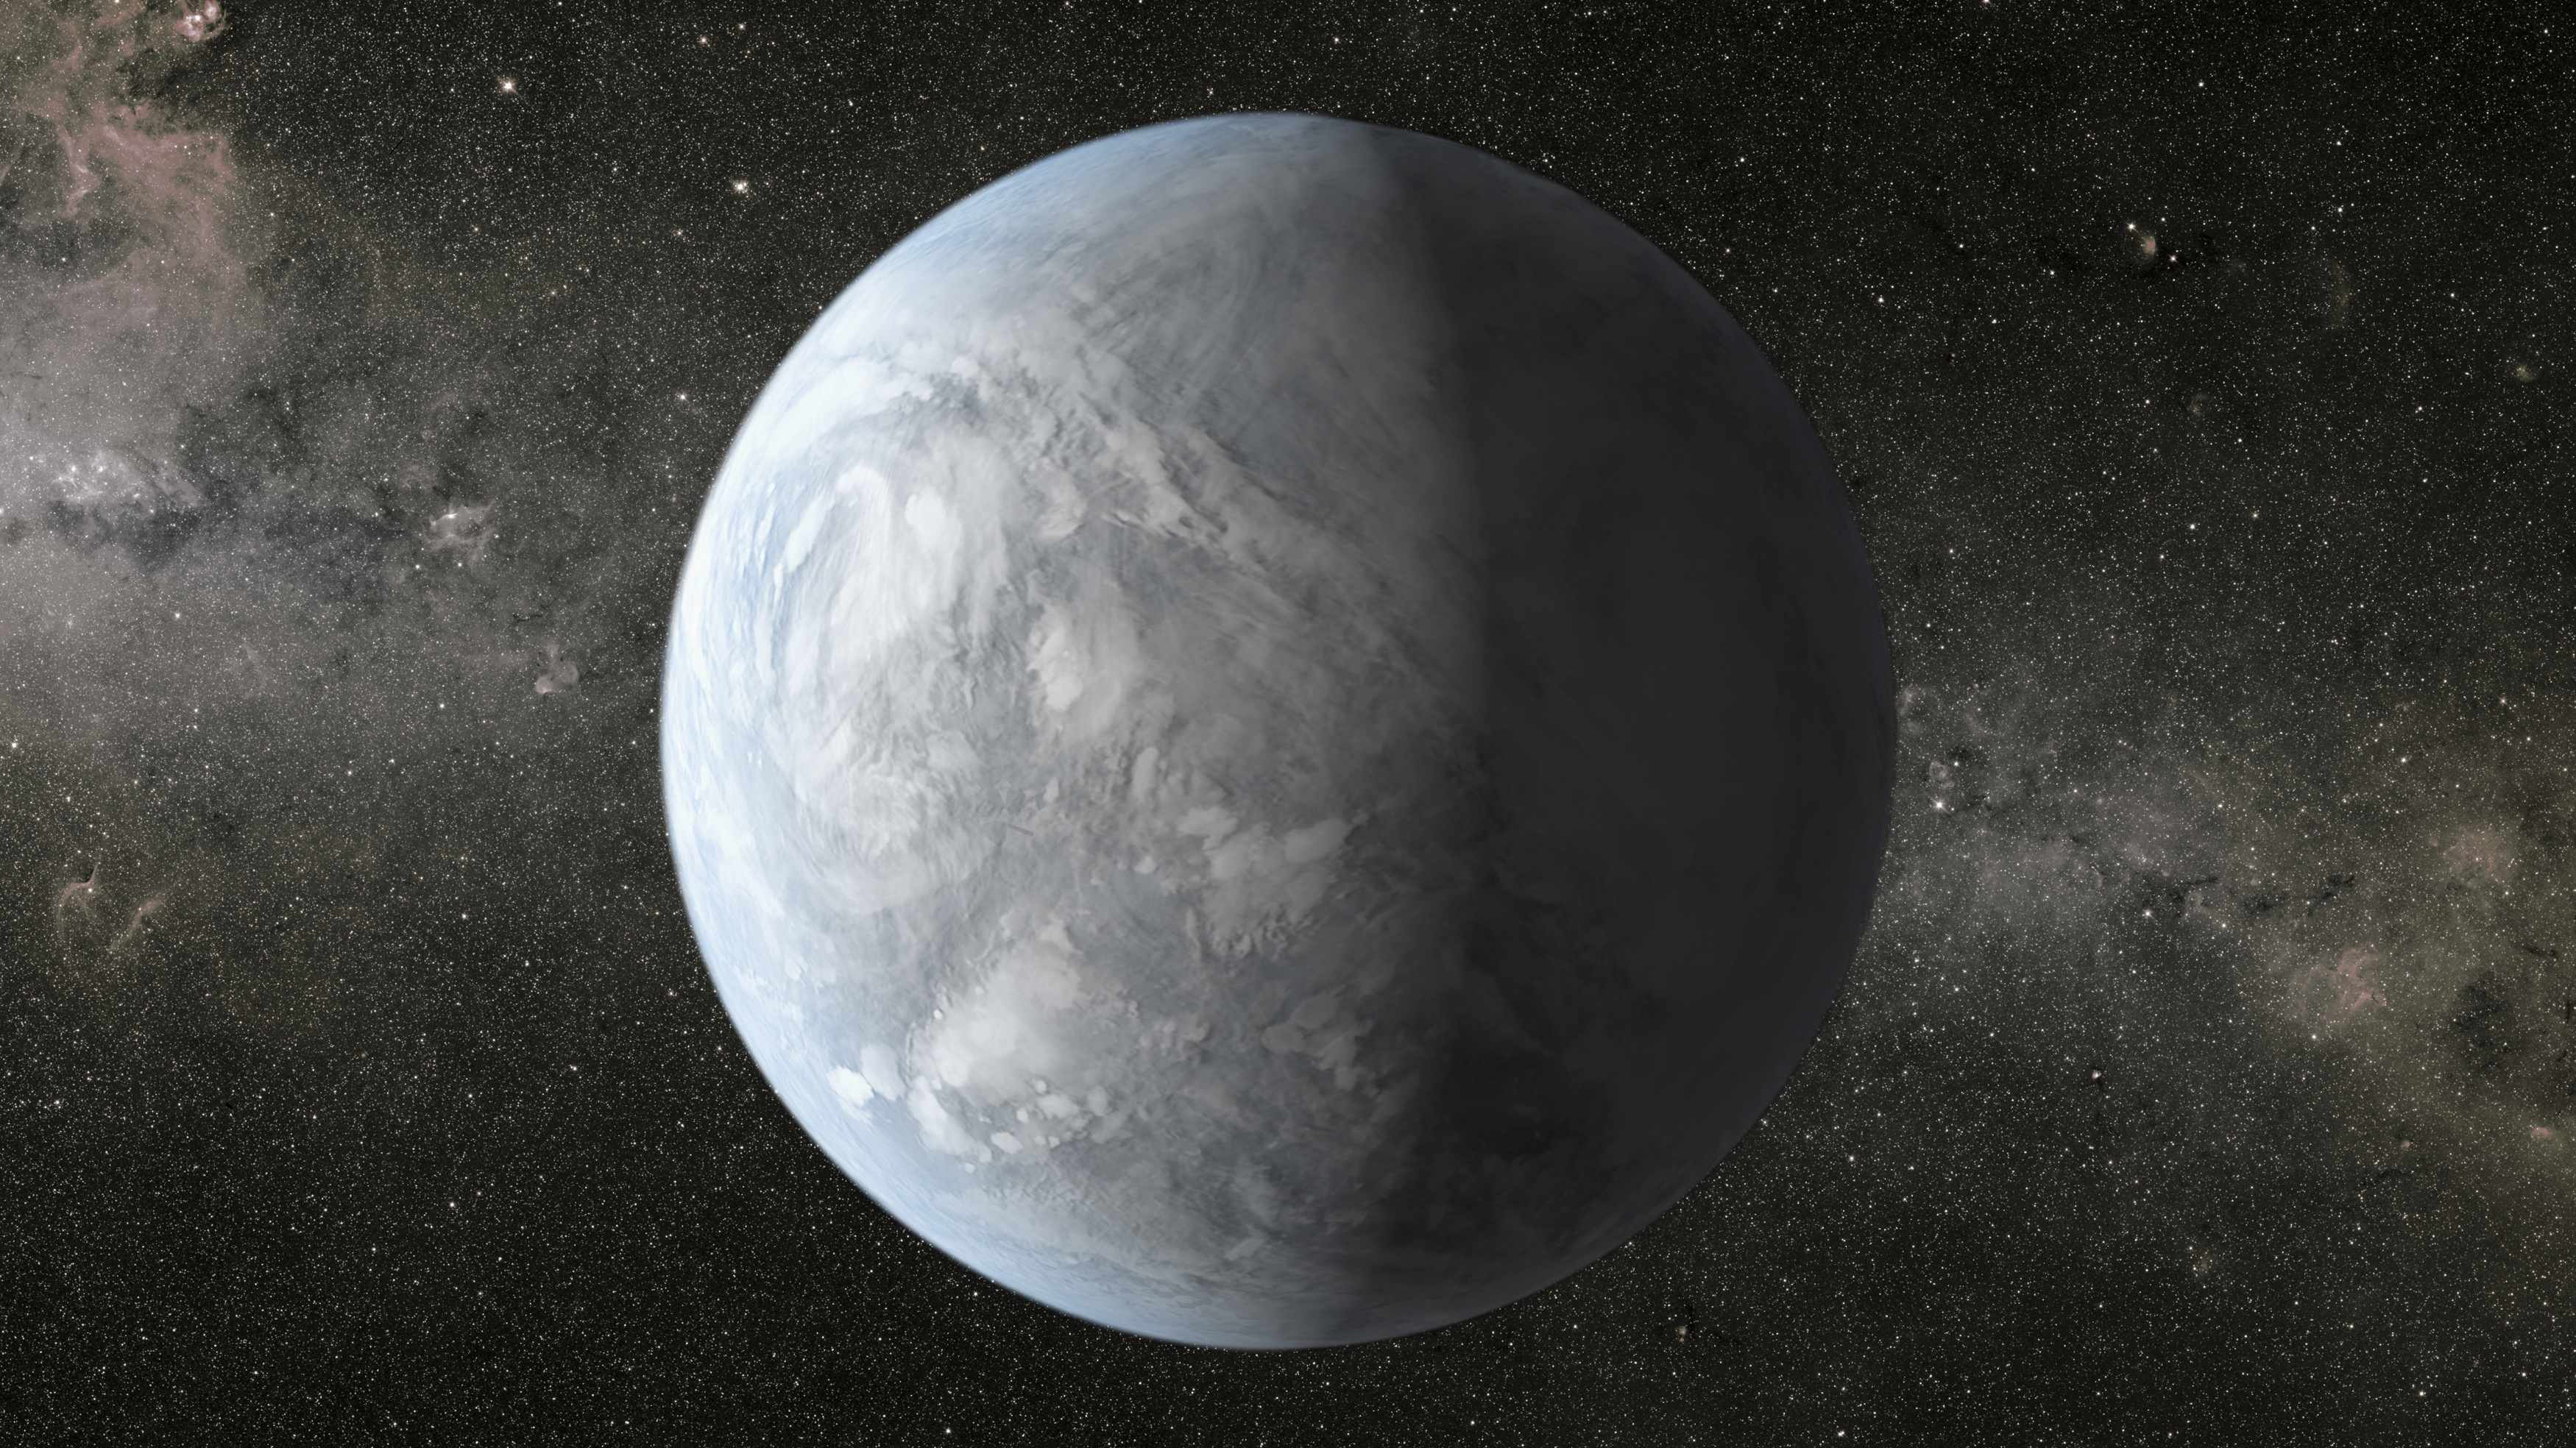 Kepler-62e is an Earth-size planet in the habitable zone of a star smaller and cooler than the sun, located about 1,200 light-years from Earth. Photo: Reuters